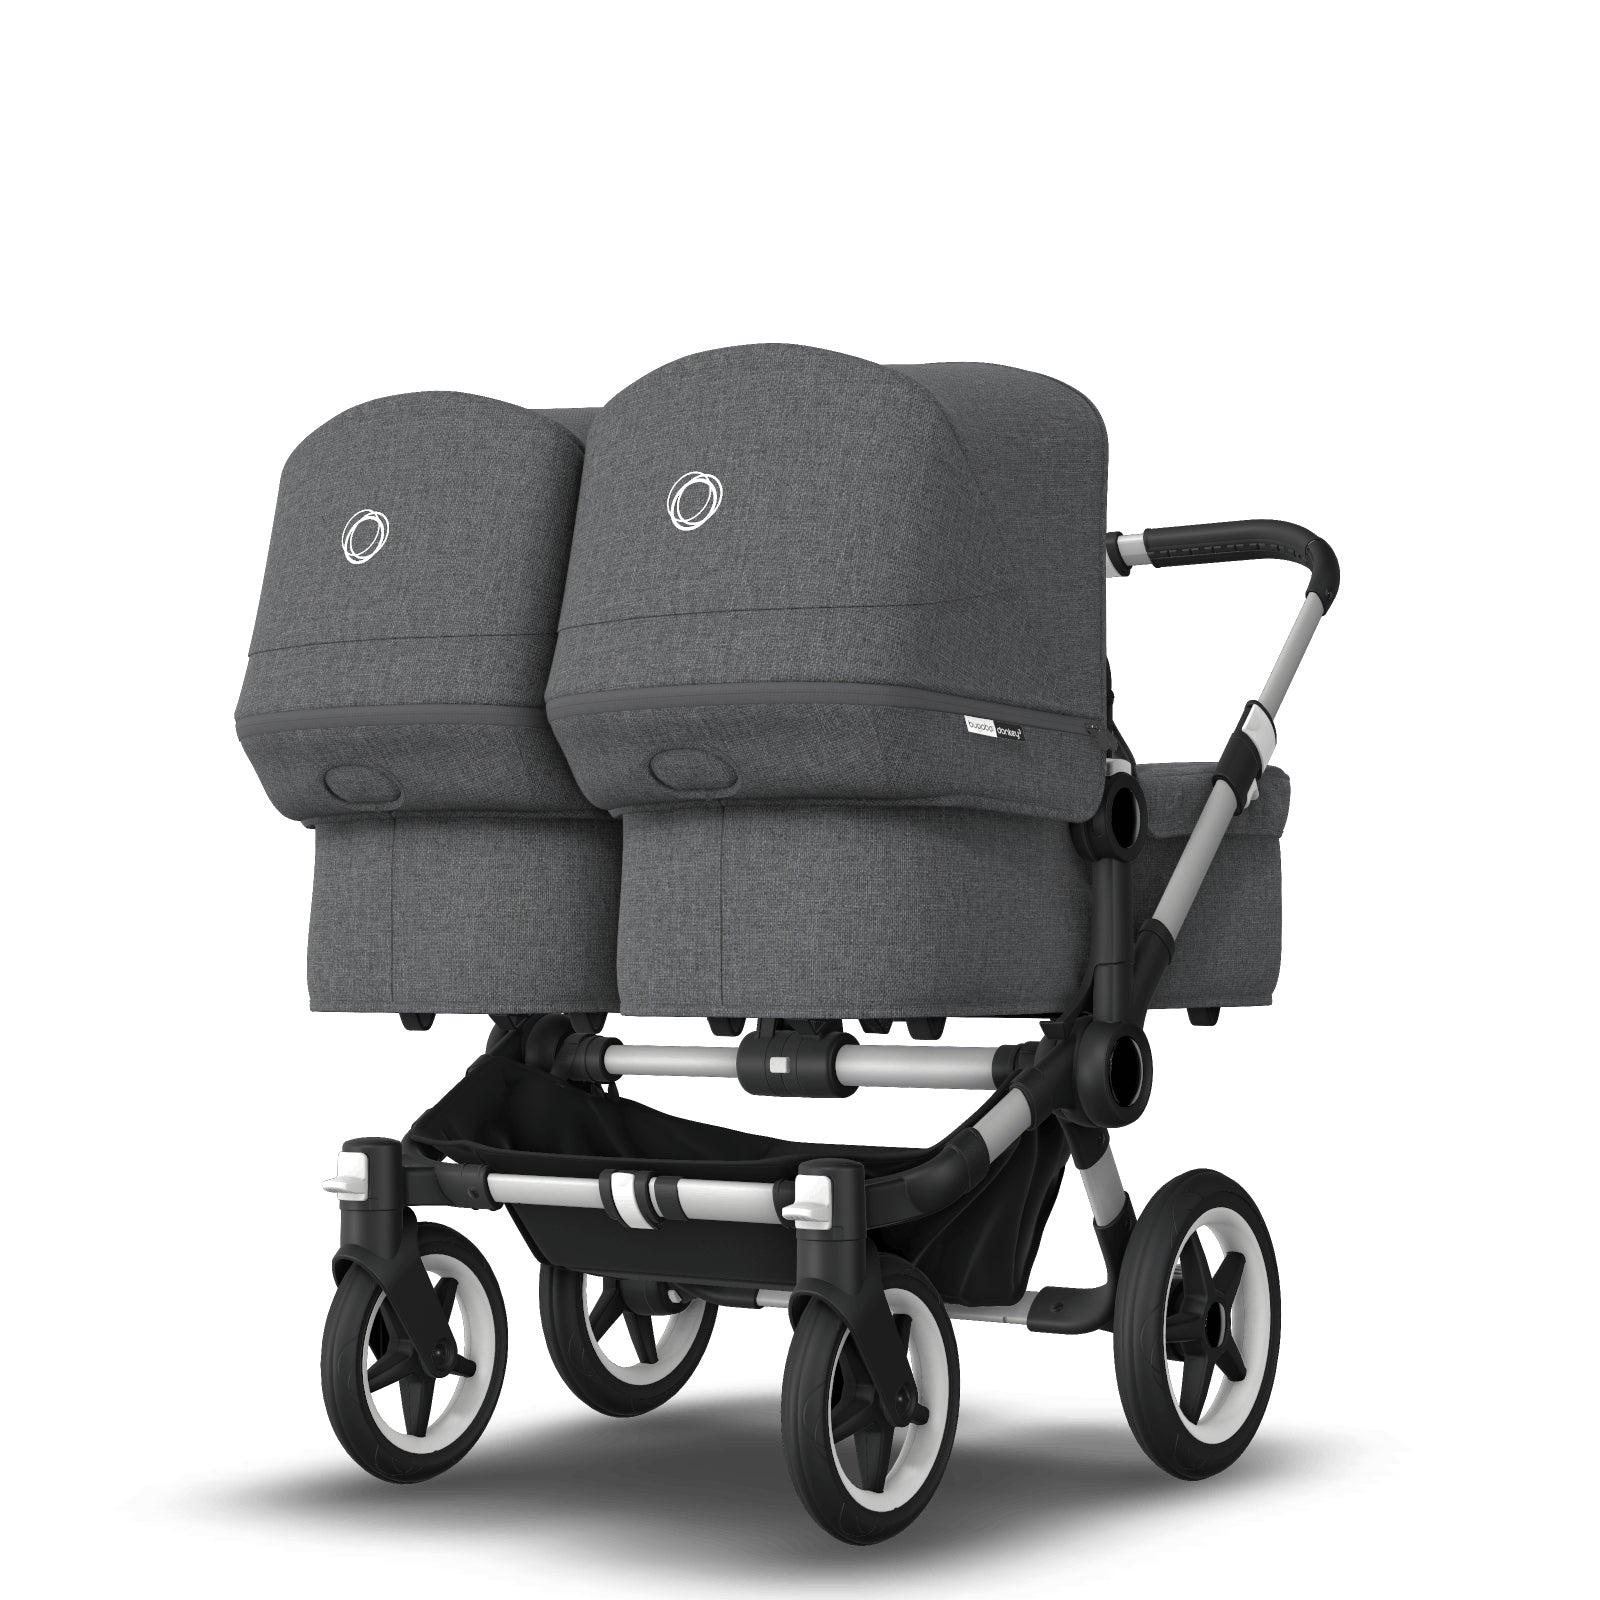 Bugaboo Donkey 3 Twin Seat and Carrycot Pushchair - Grey Melange